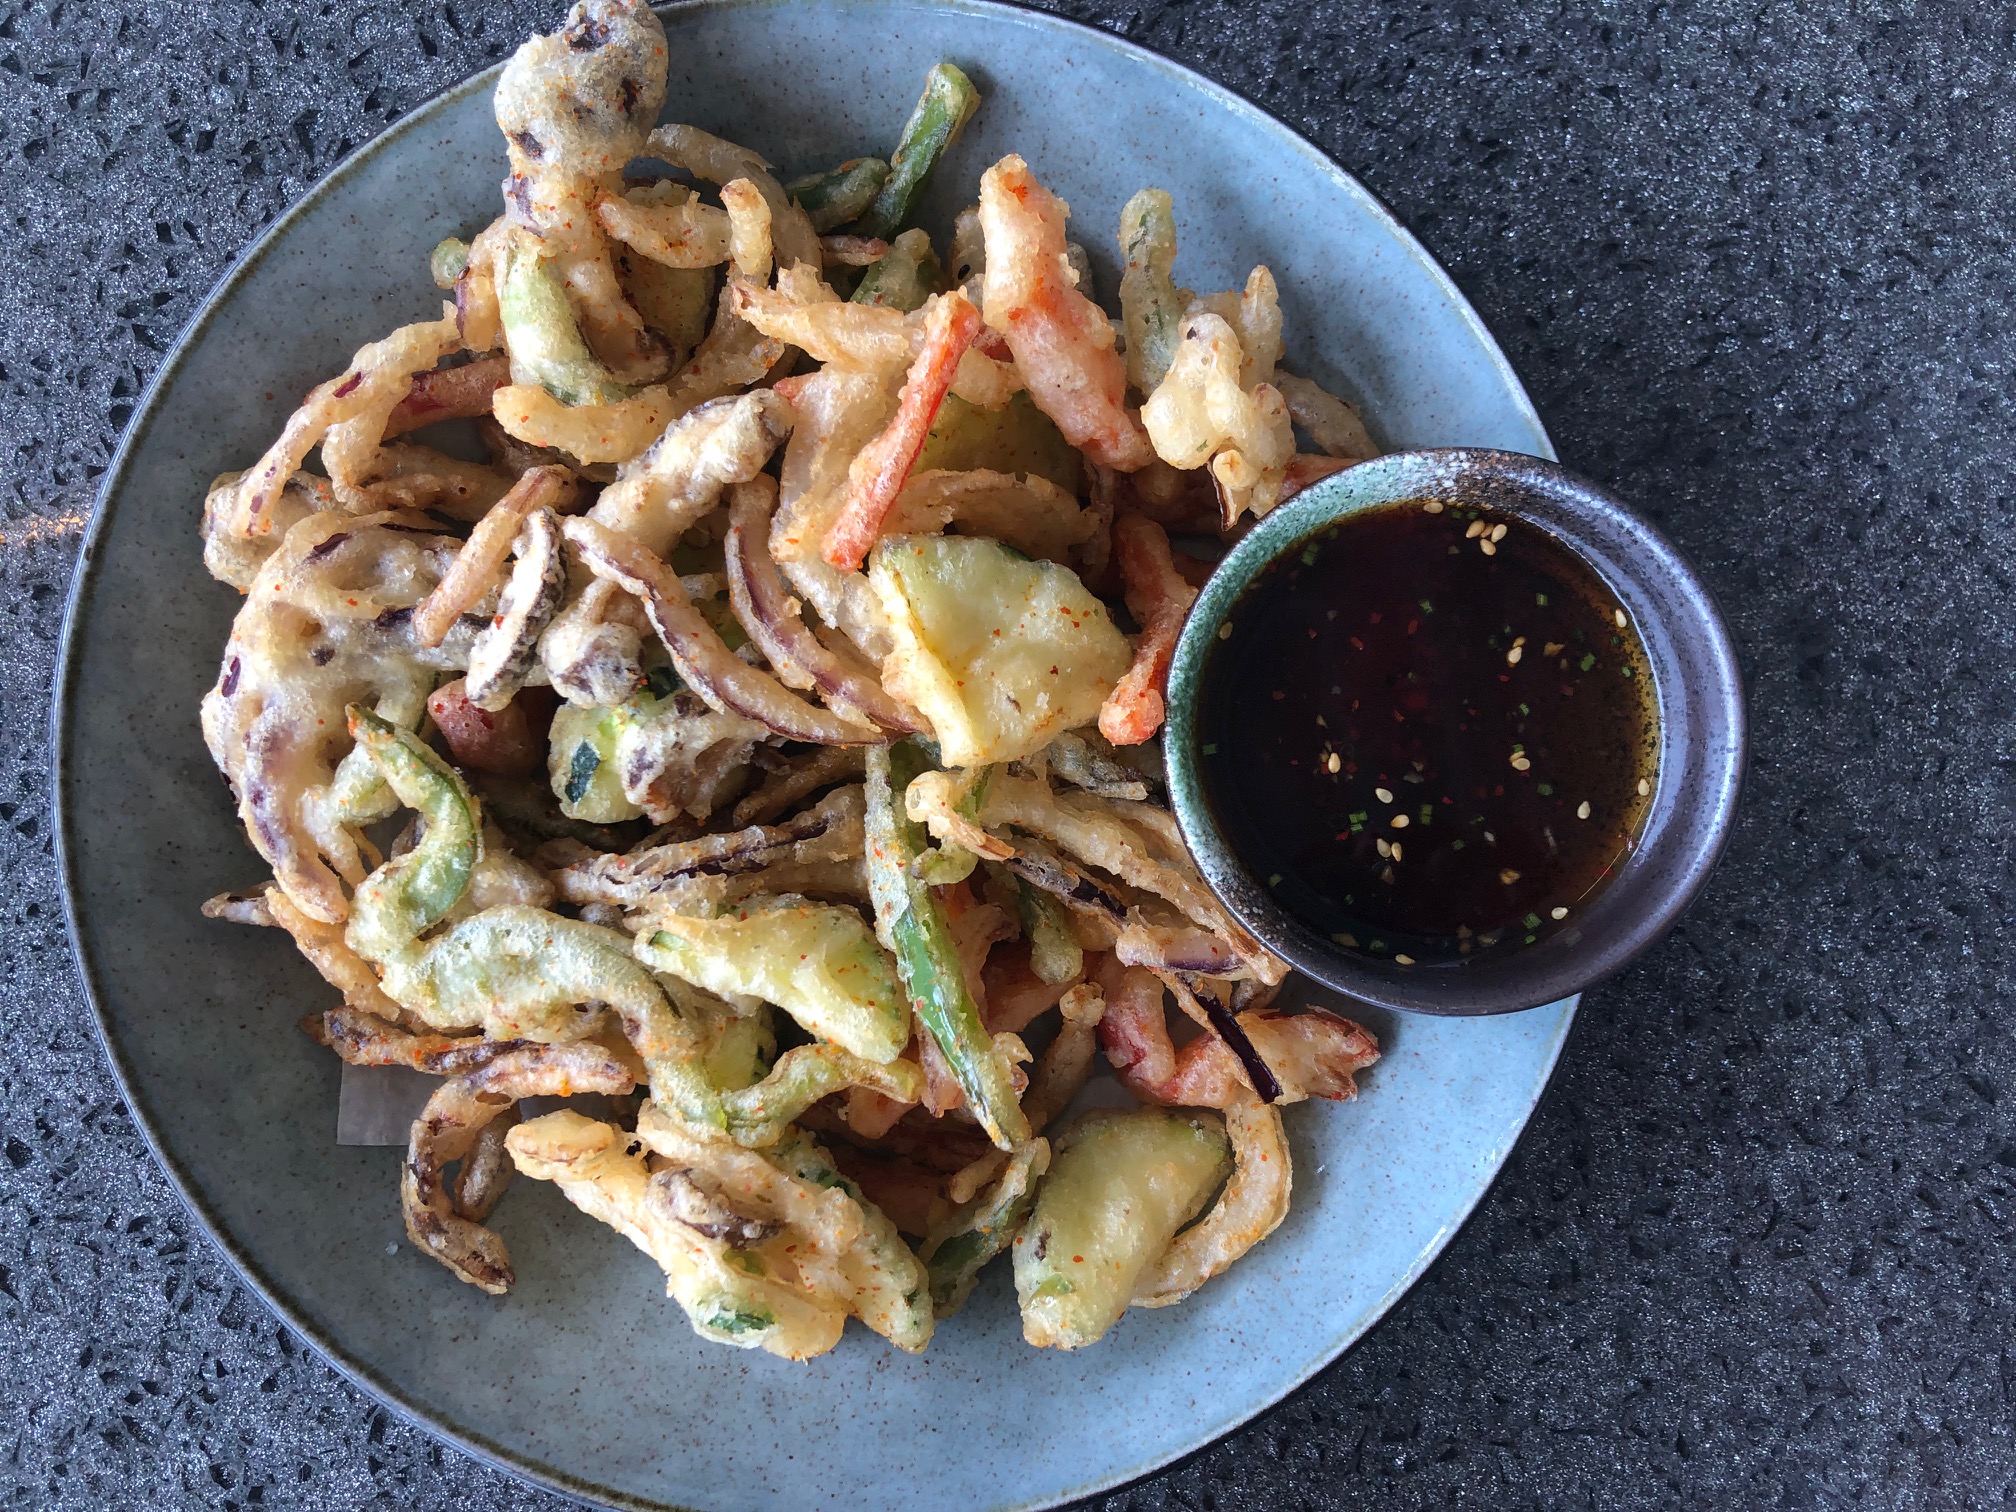 On a gray table, there is a white bowl of fried tempura vegetable strings with a side cup of soy sauce with sesame seeds. Photo by Alyssa Buckley.